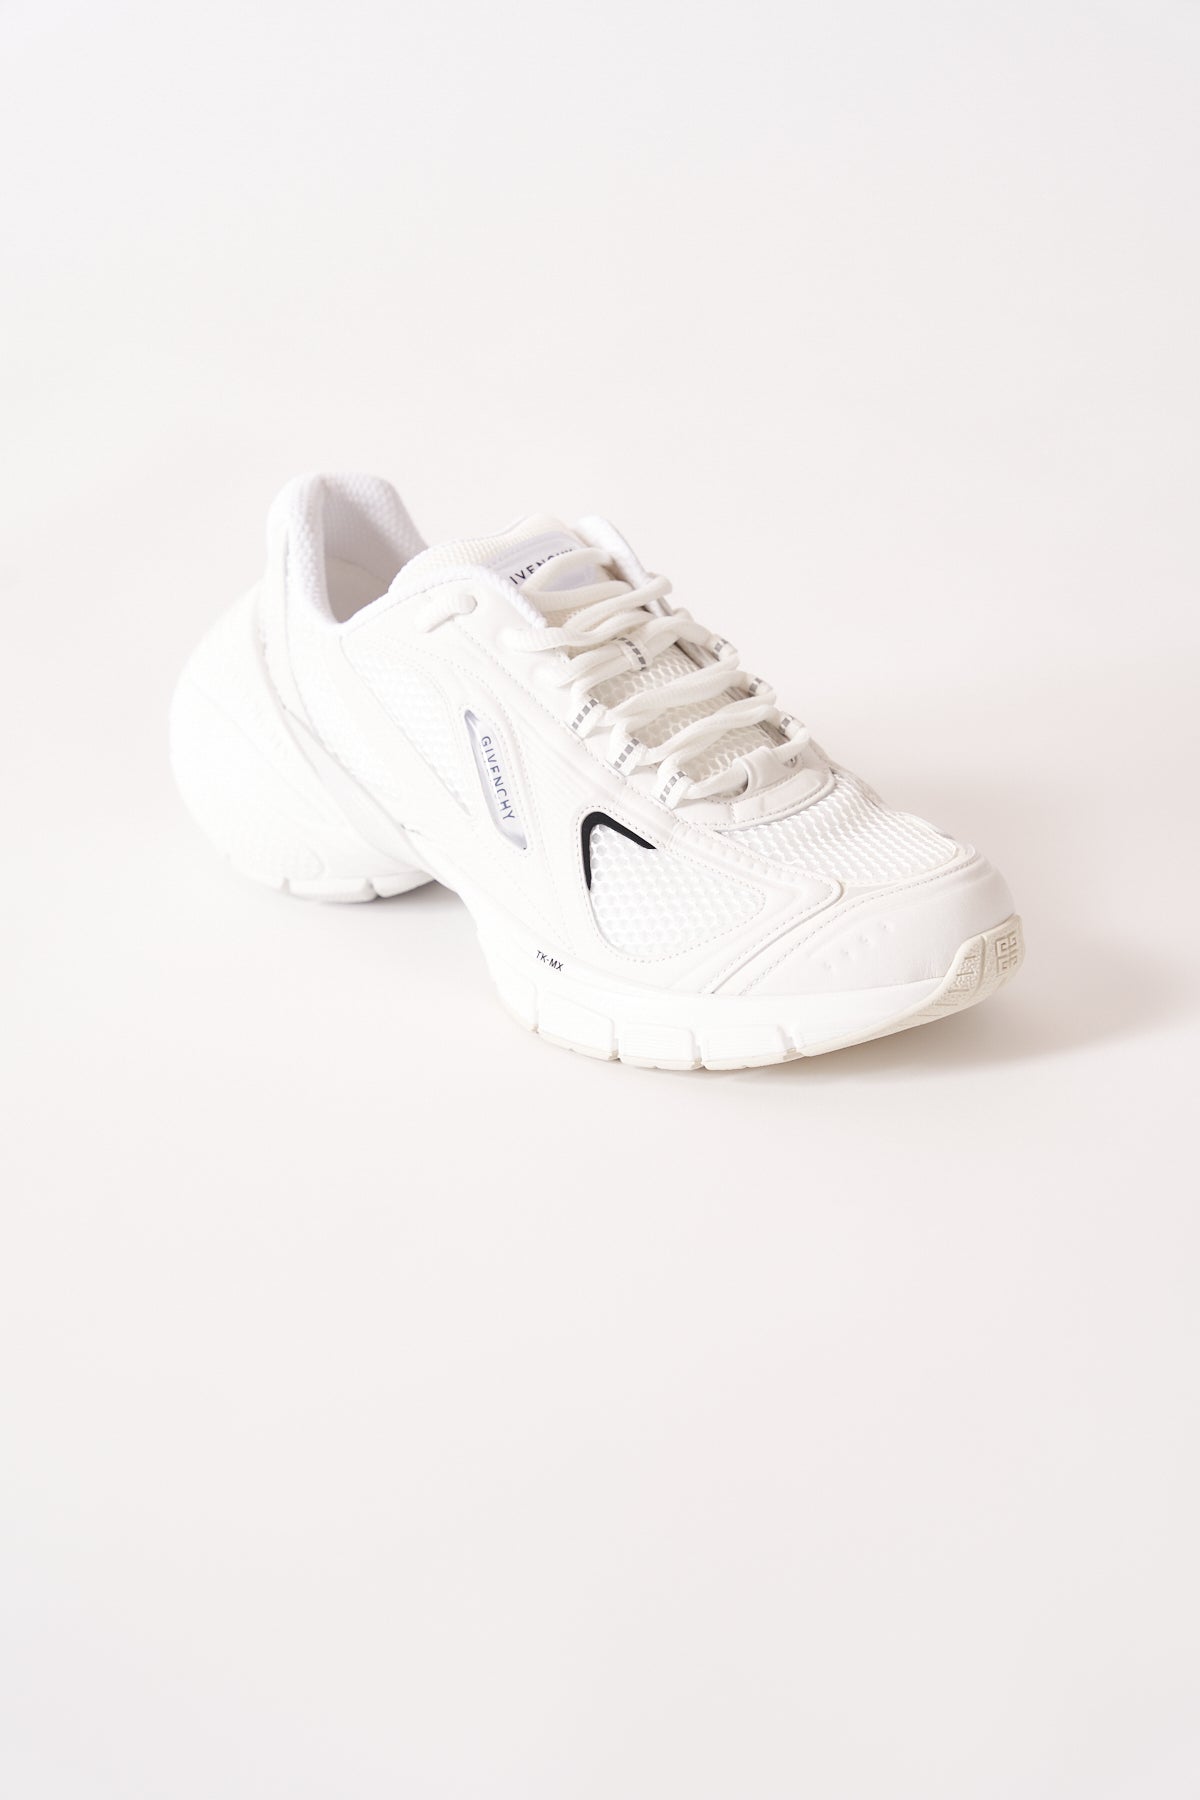 GIVENCHY | TK-MX RUNNER SNEAKERS IN IVORY